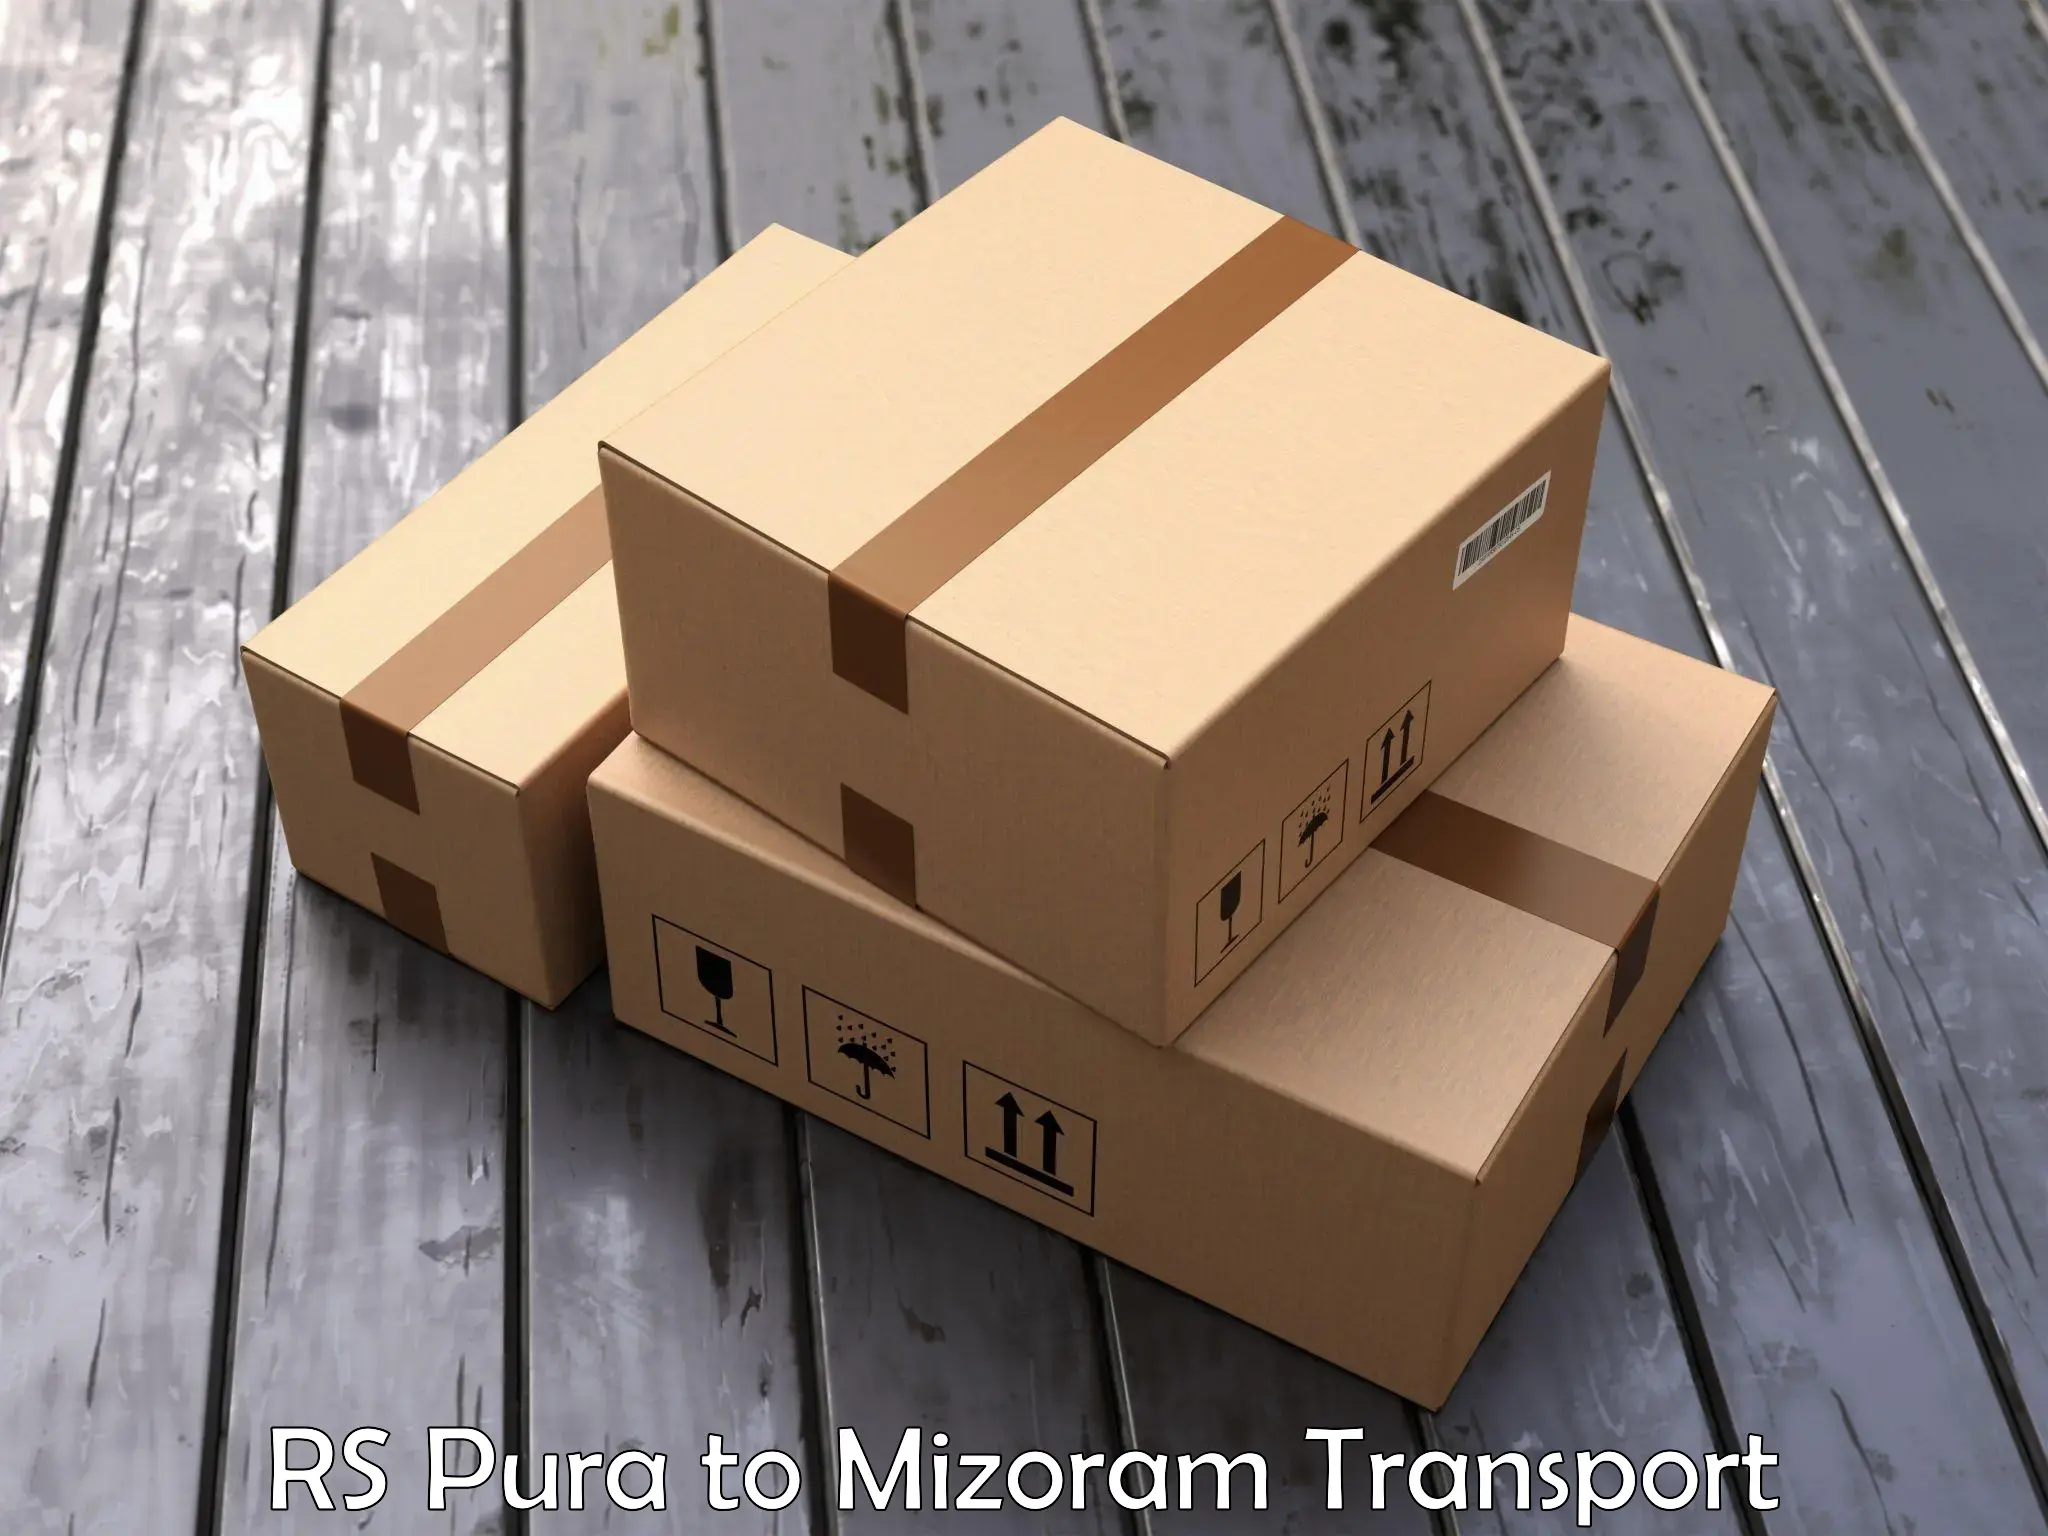 Express transport services RS Pura to Siaha